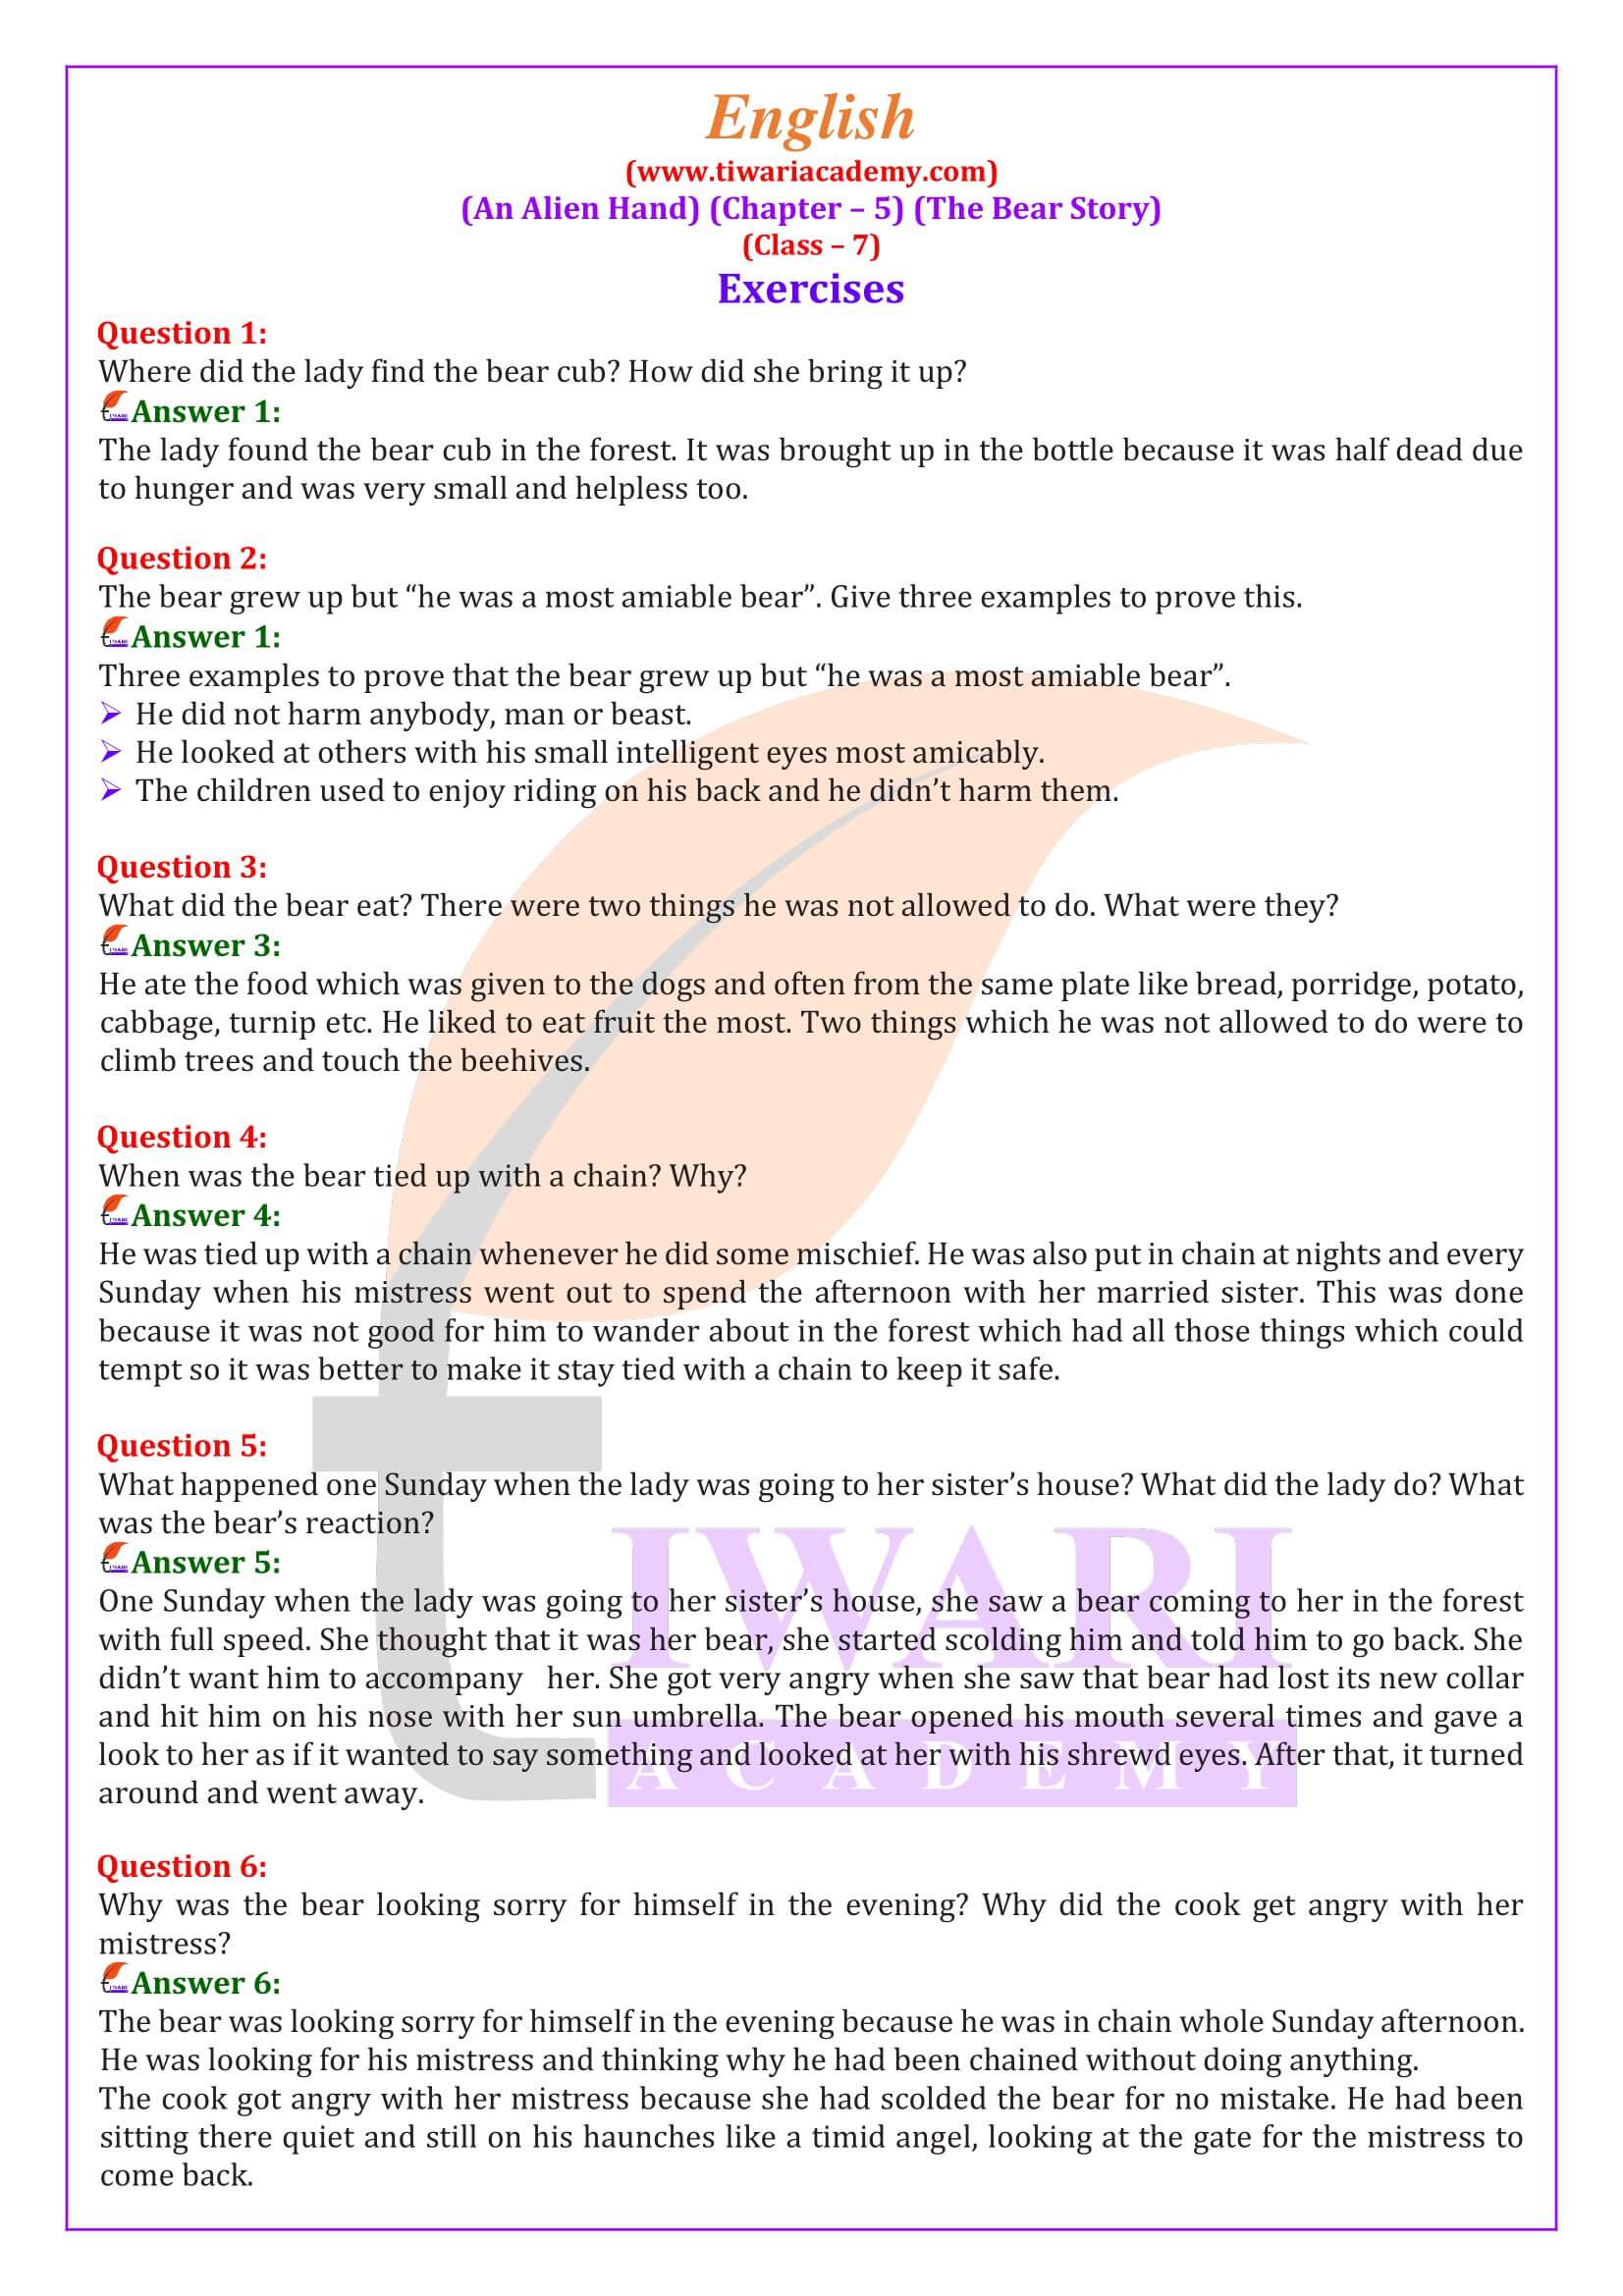 NCERT Solutions for Class 7 English an Alien Hand Chapter 5 the Bear Story